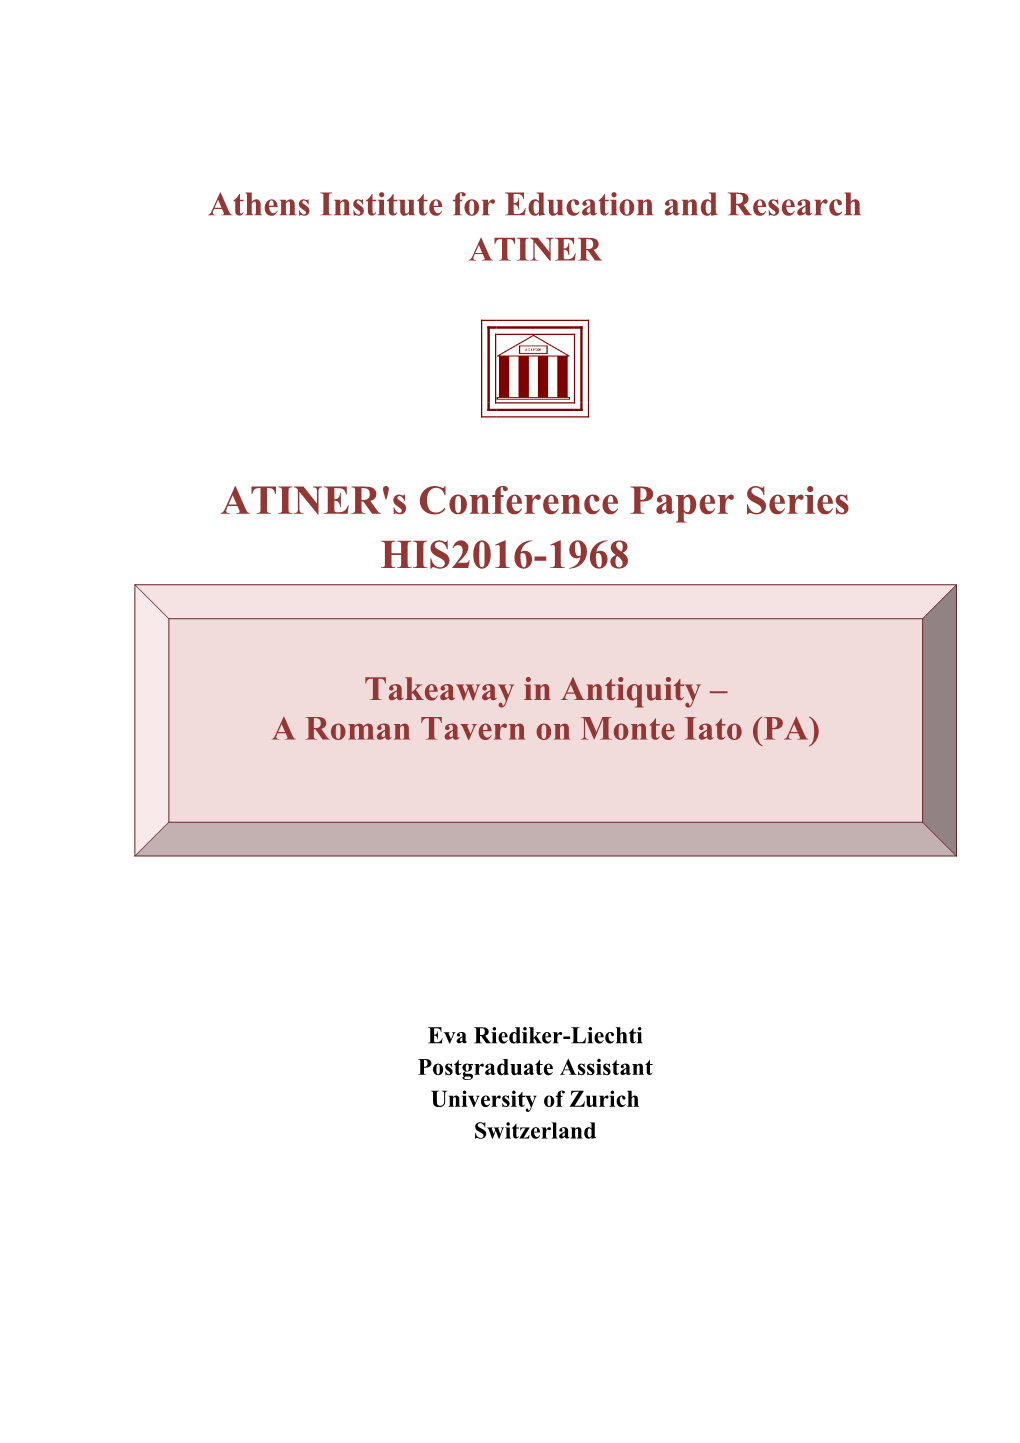 ATINER's Conference Paper Series HIS2016-1968